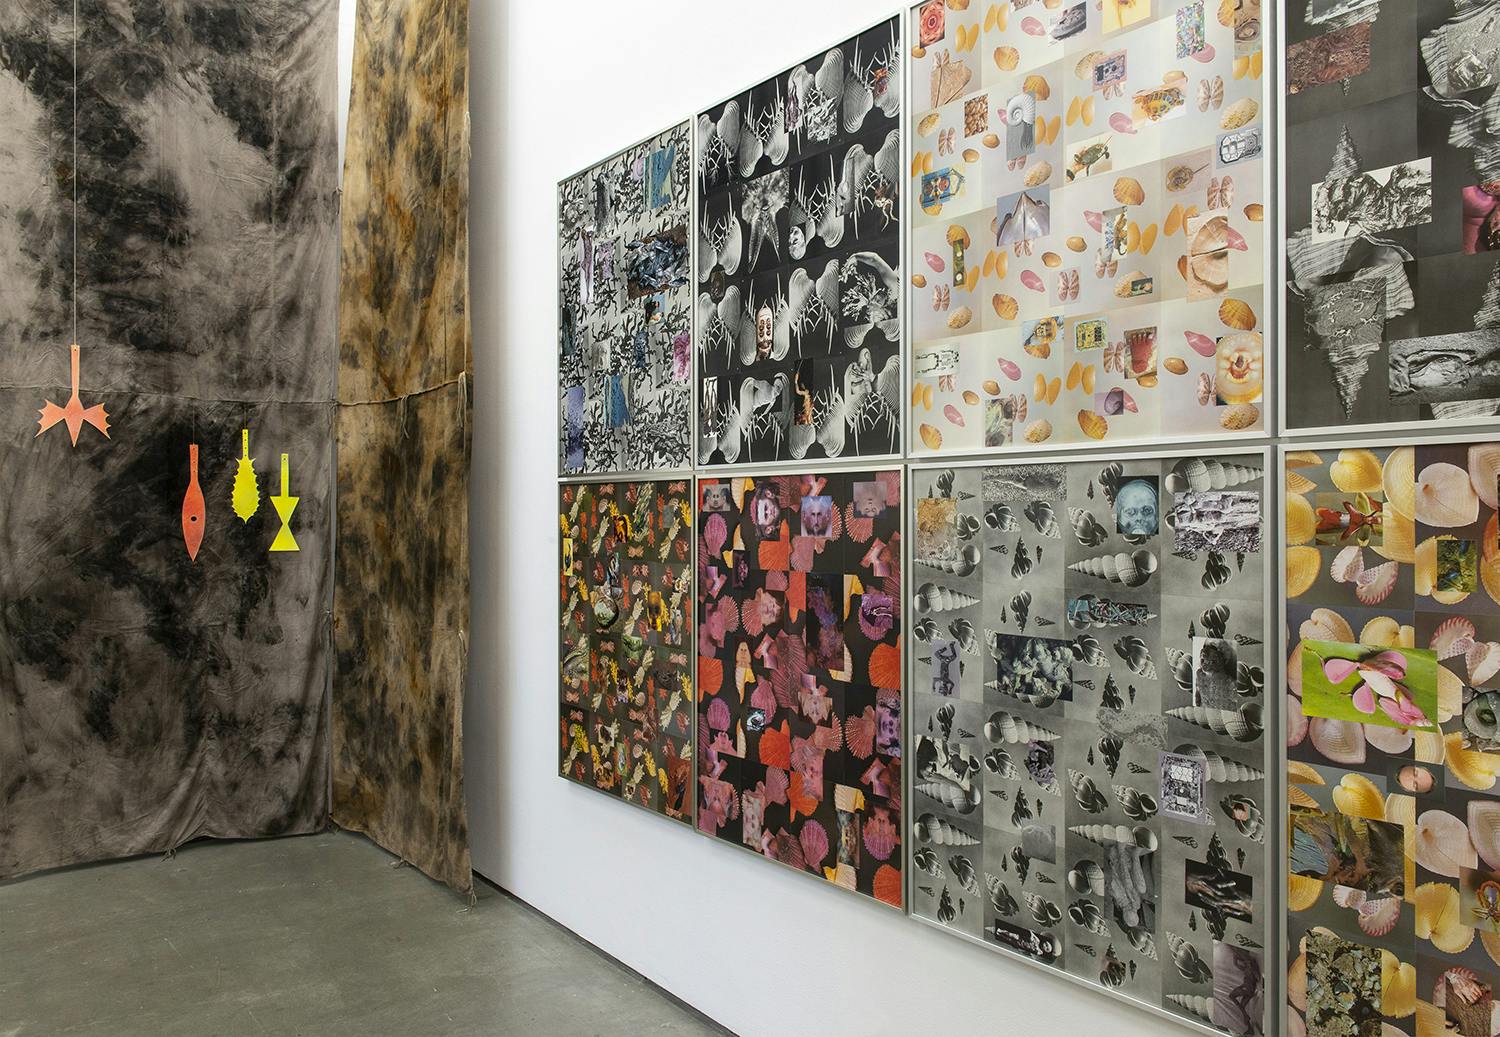 Eight framed prints of collages hang on a wall on the right side of the image. On the left there is brown tie dyed fabric hanging from the ceiling. Suspended from the fabric are tool-like sculptures.